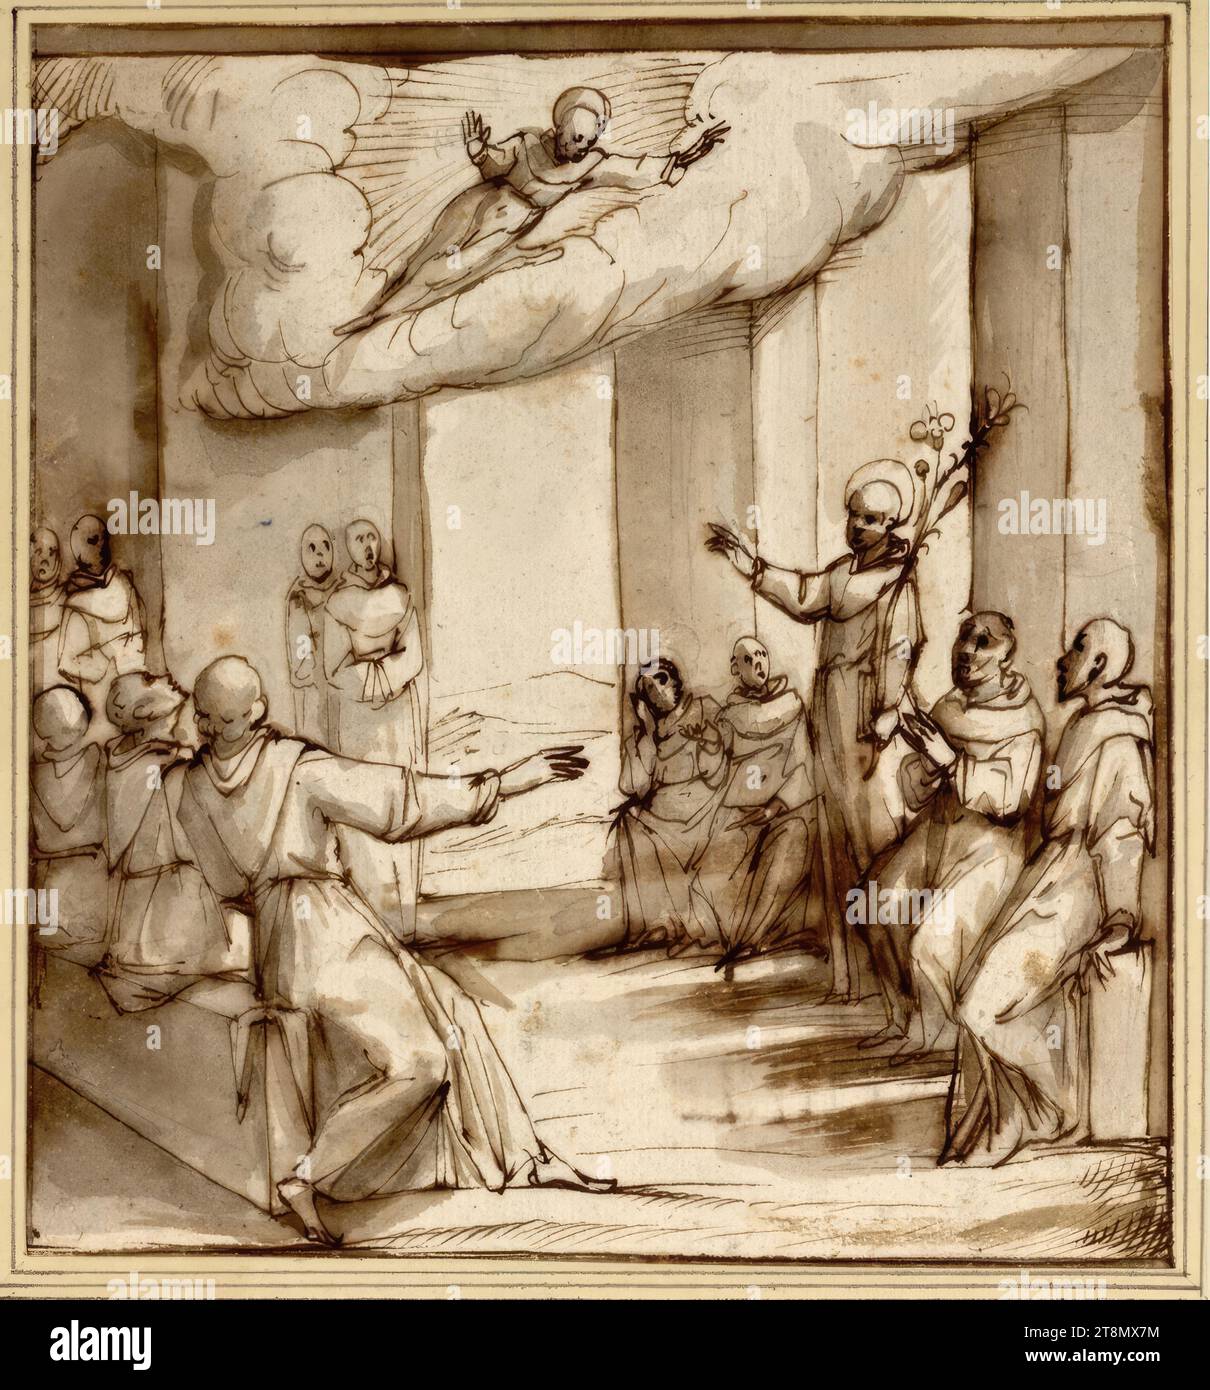 While Saint Anthony is preaching, Saint Francis appears to him in clouds, Domenico Cresti gen. Passignano (Badia a Passignano (Tavarnelle Val di Pesa) 1559 - 1638 Florence), drawing, pen, ink, wash, 16.0 x 15.9 cm, l.b. Duke Albert of Saxe-Teschen Stock Photo